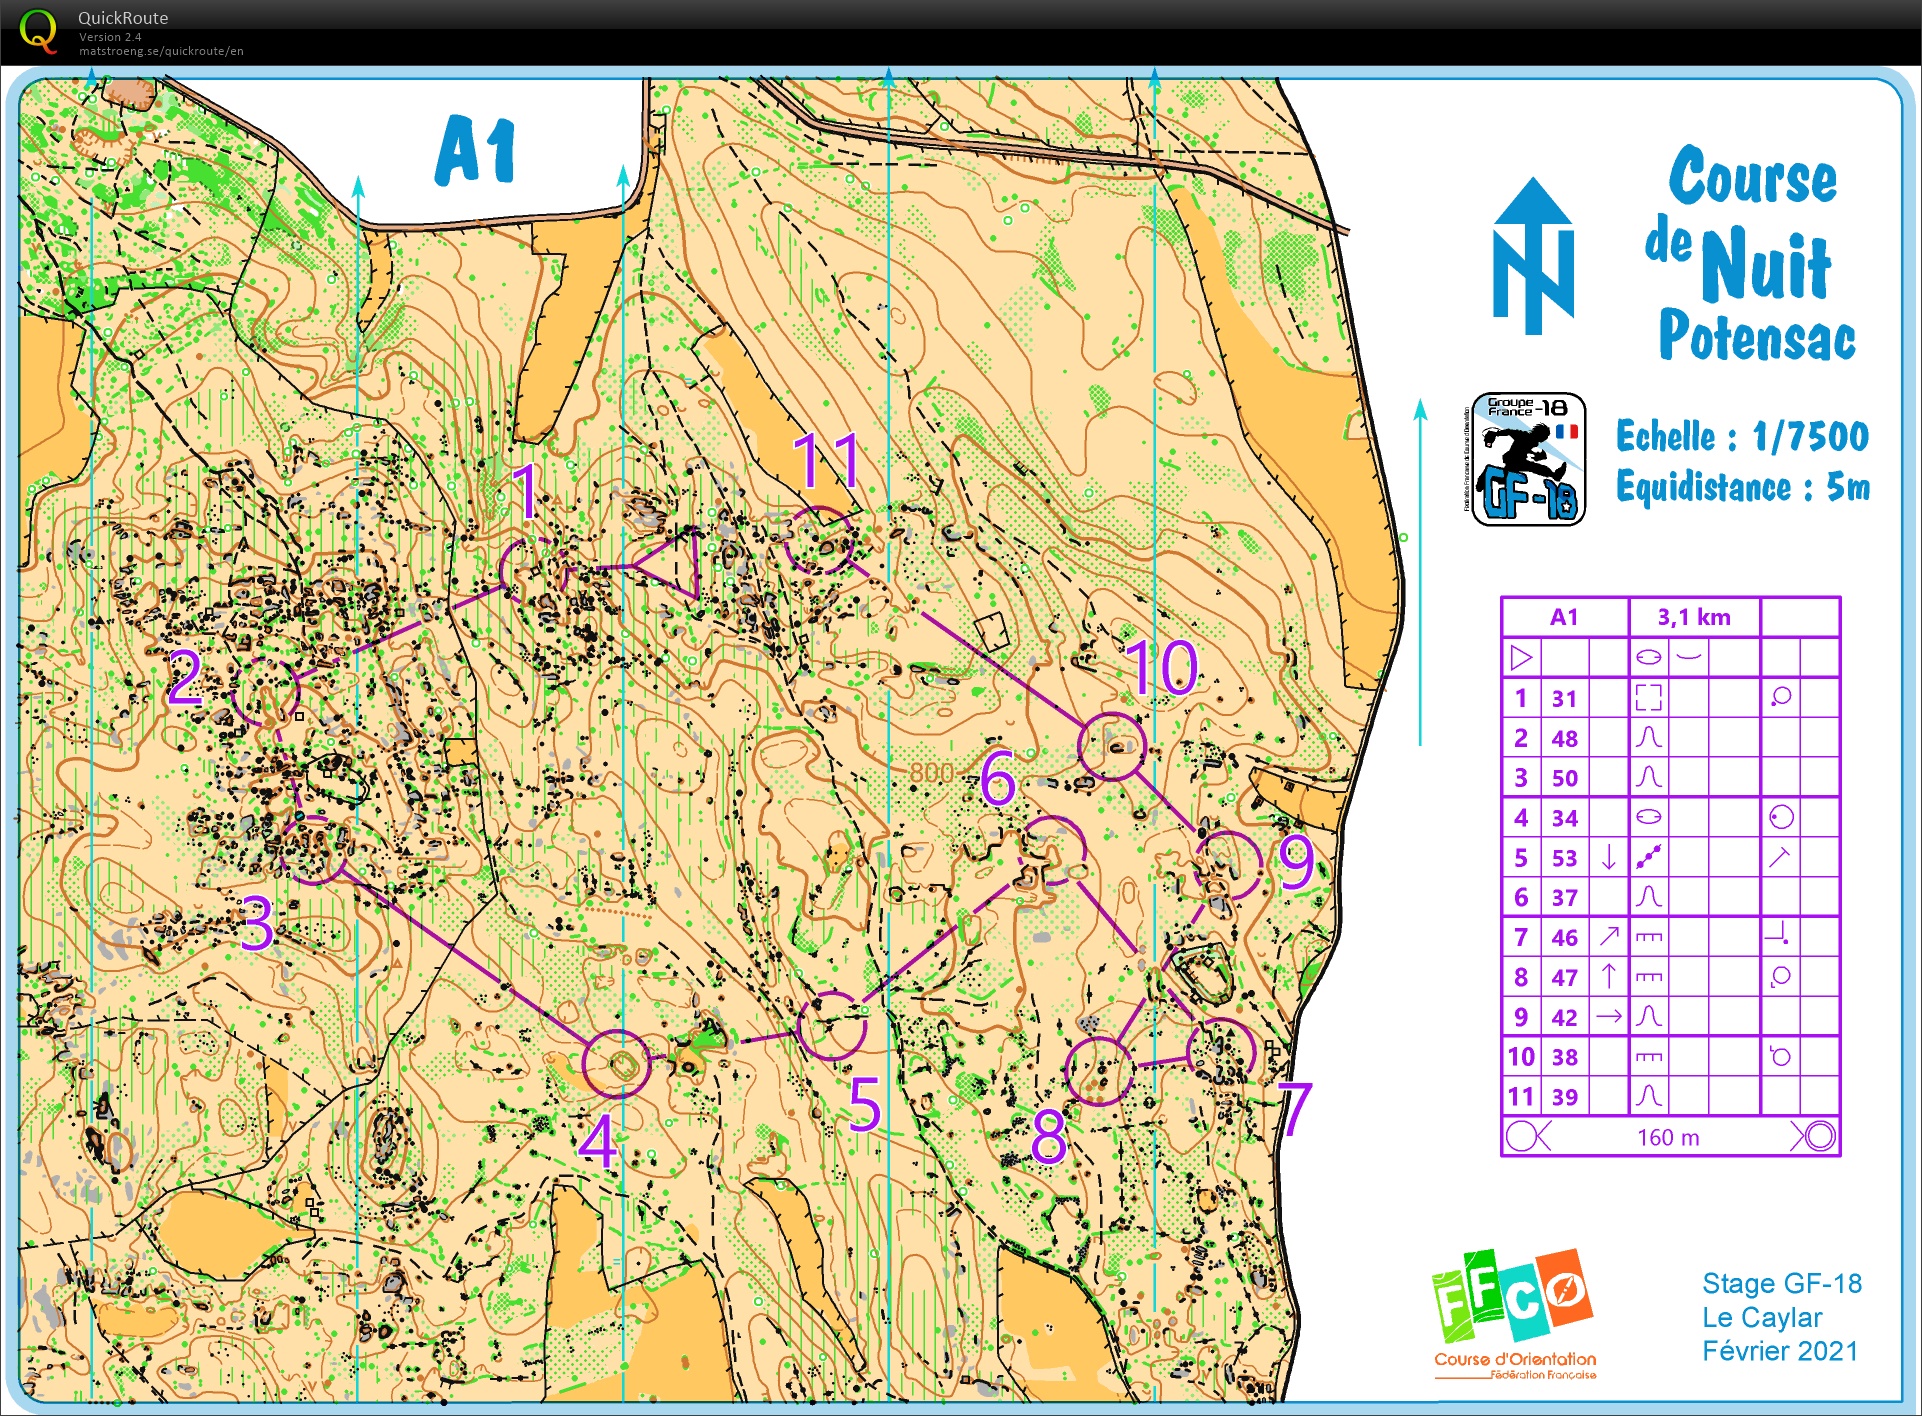 Stage GF-18 Larzac (E5) CO nuit - A1 (2021-02-07)